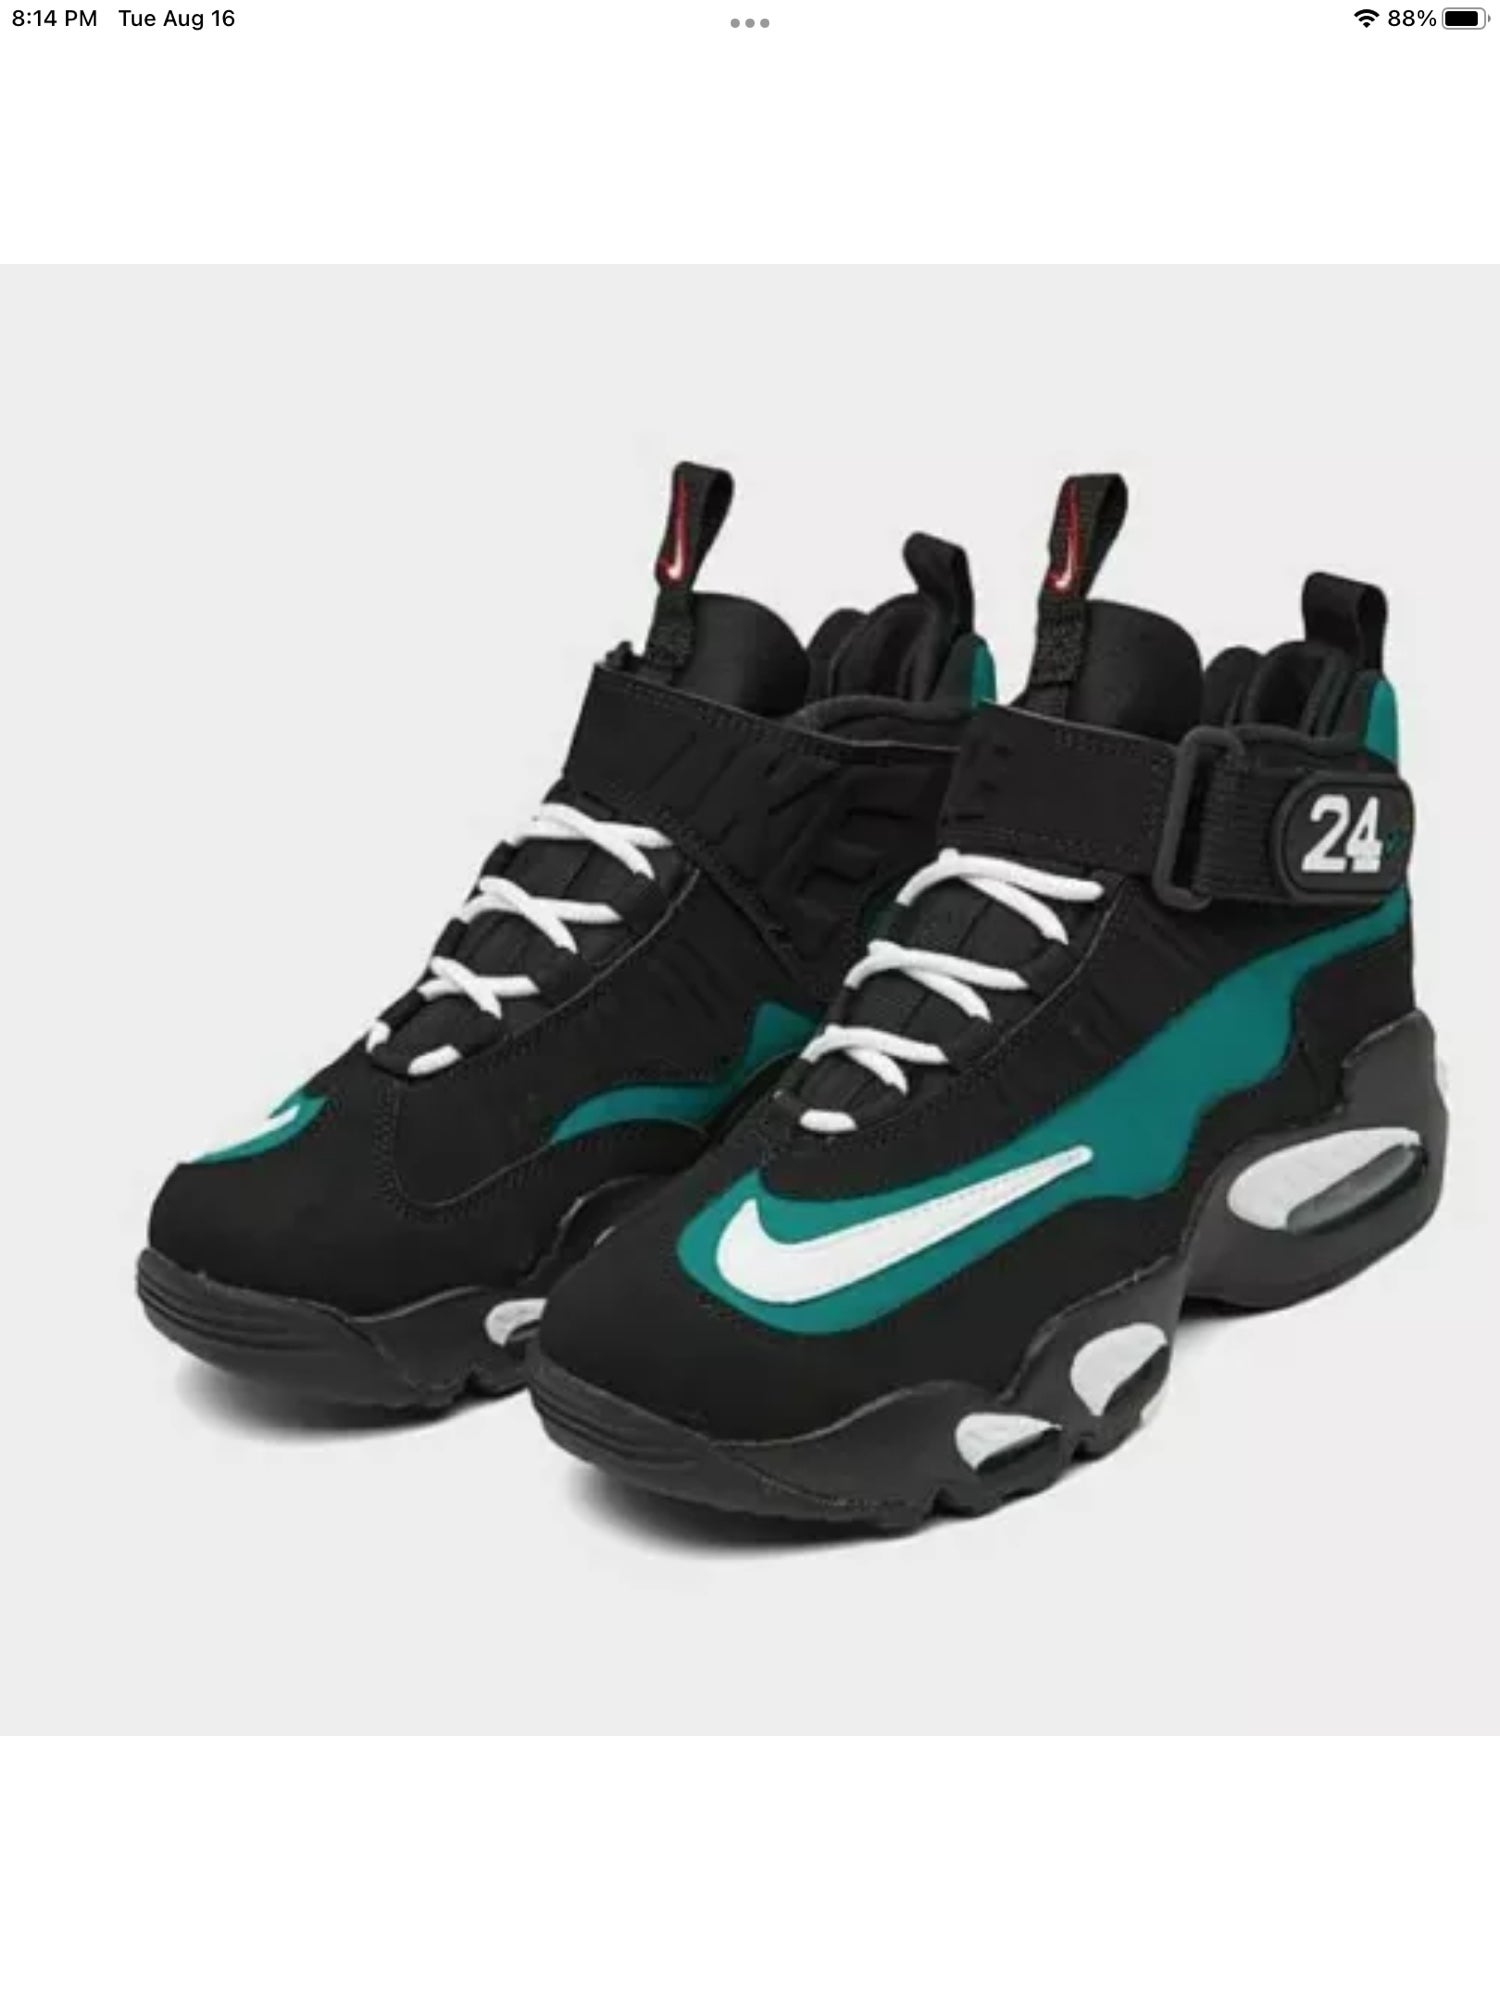 Nike Air Griffey Max 1 Freshwater GS 2021 Size 6Y Women's 7.5